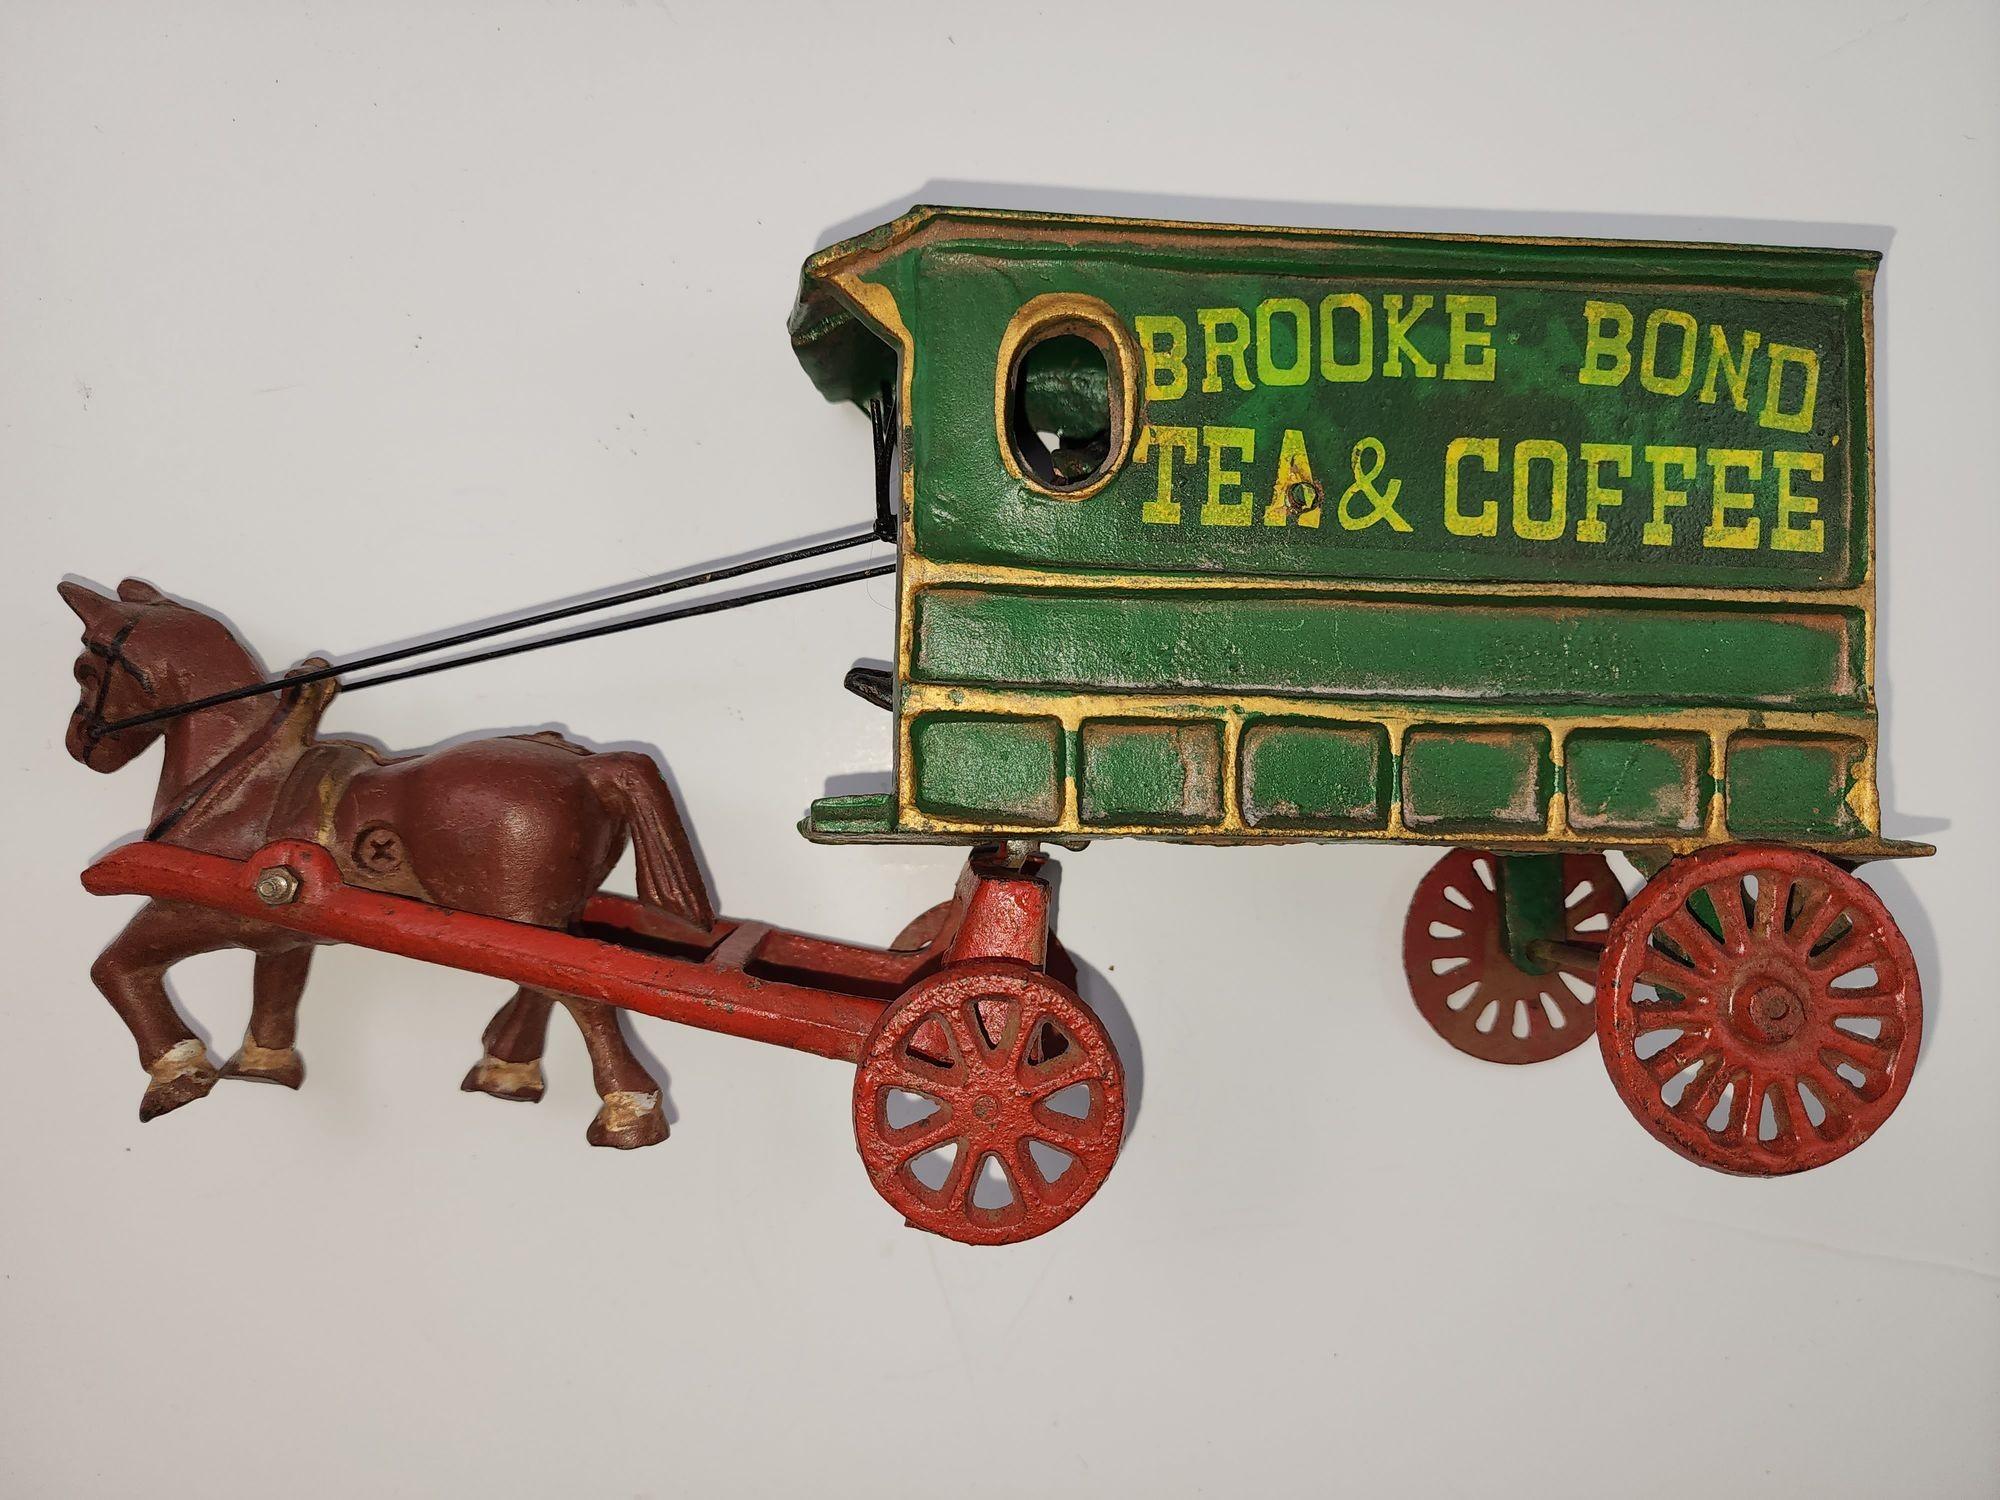 Vintage Brooke Bond Tea and Coffee Cast Iron Horse and Wagon, Driver included.
Please look at all the pictures antique Cast iron coach, horse and wagon in good vintage condition, wheels roll.
Antique Cast Iron Green Toy Brooke Bond Tea & Coffee